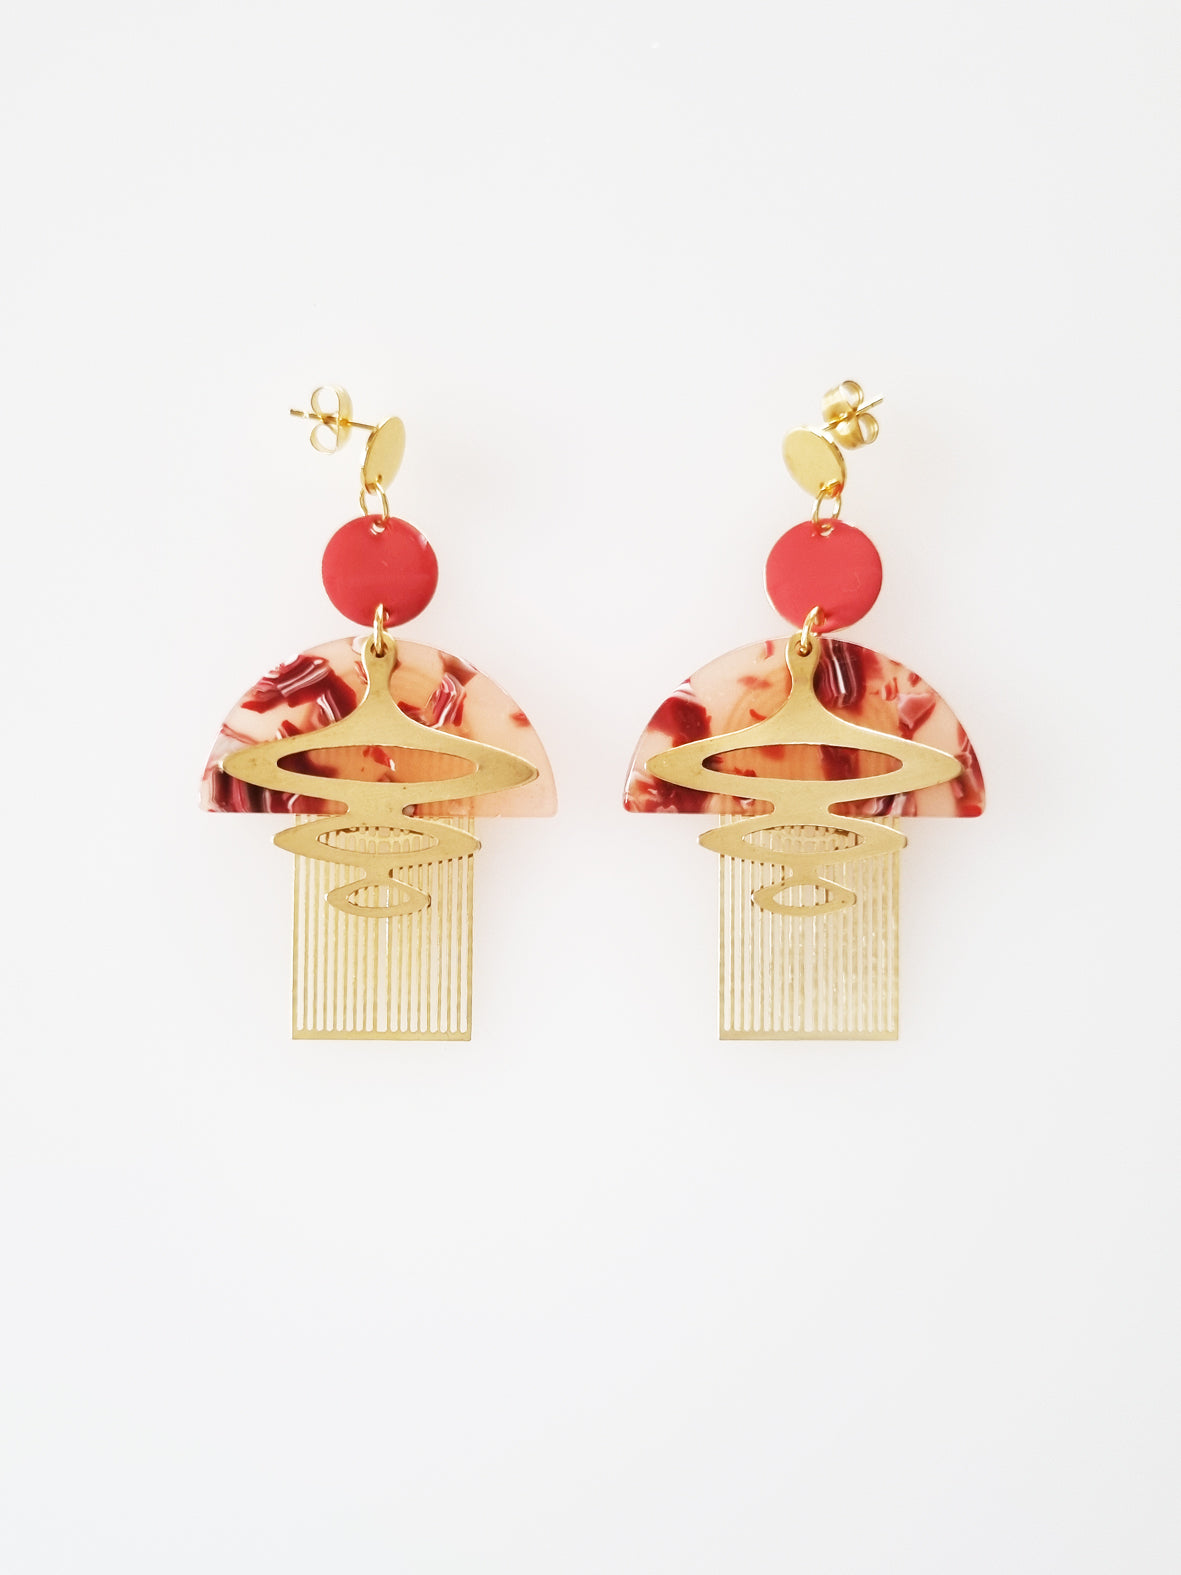 A pair of coral dangle earrings sits against a white background. The earrings feature a coral coloured enamel dot with a brass arch, coral acrylic half circle, and geometric brass pieces attached below.